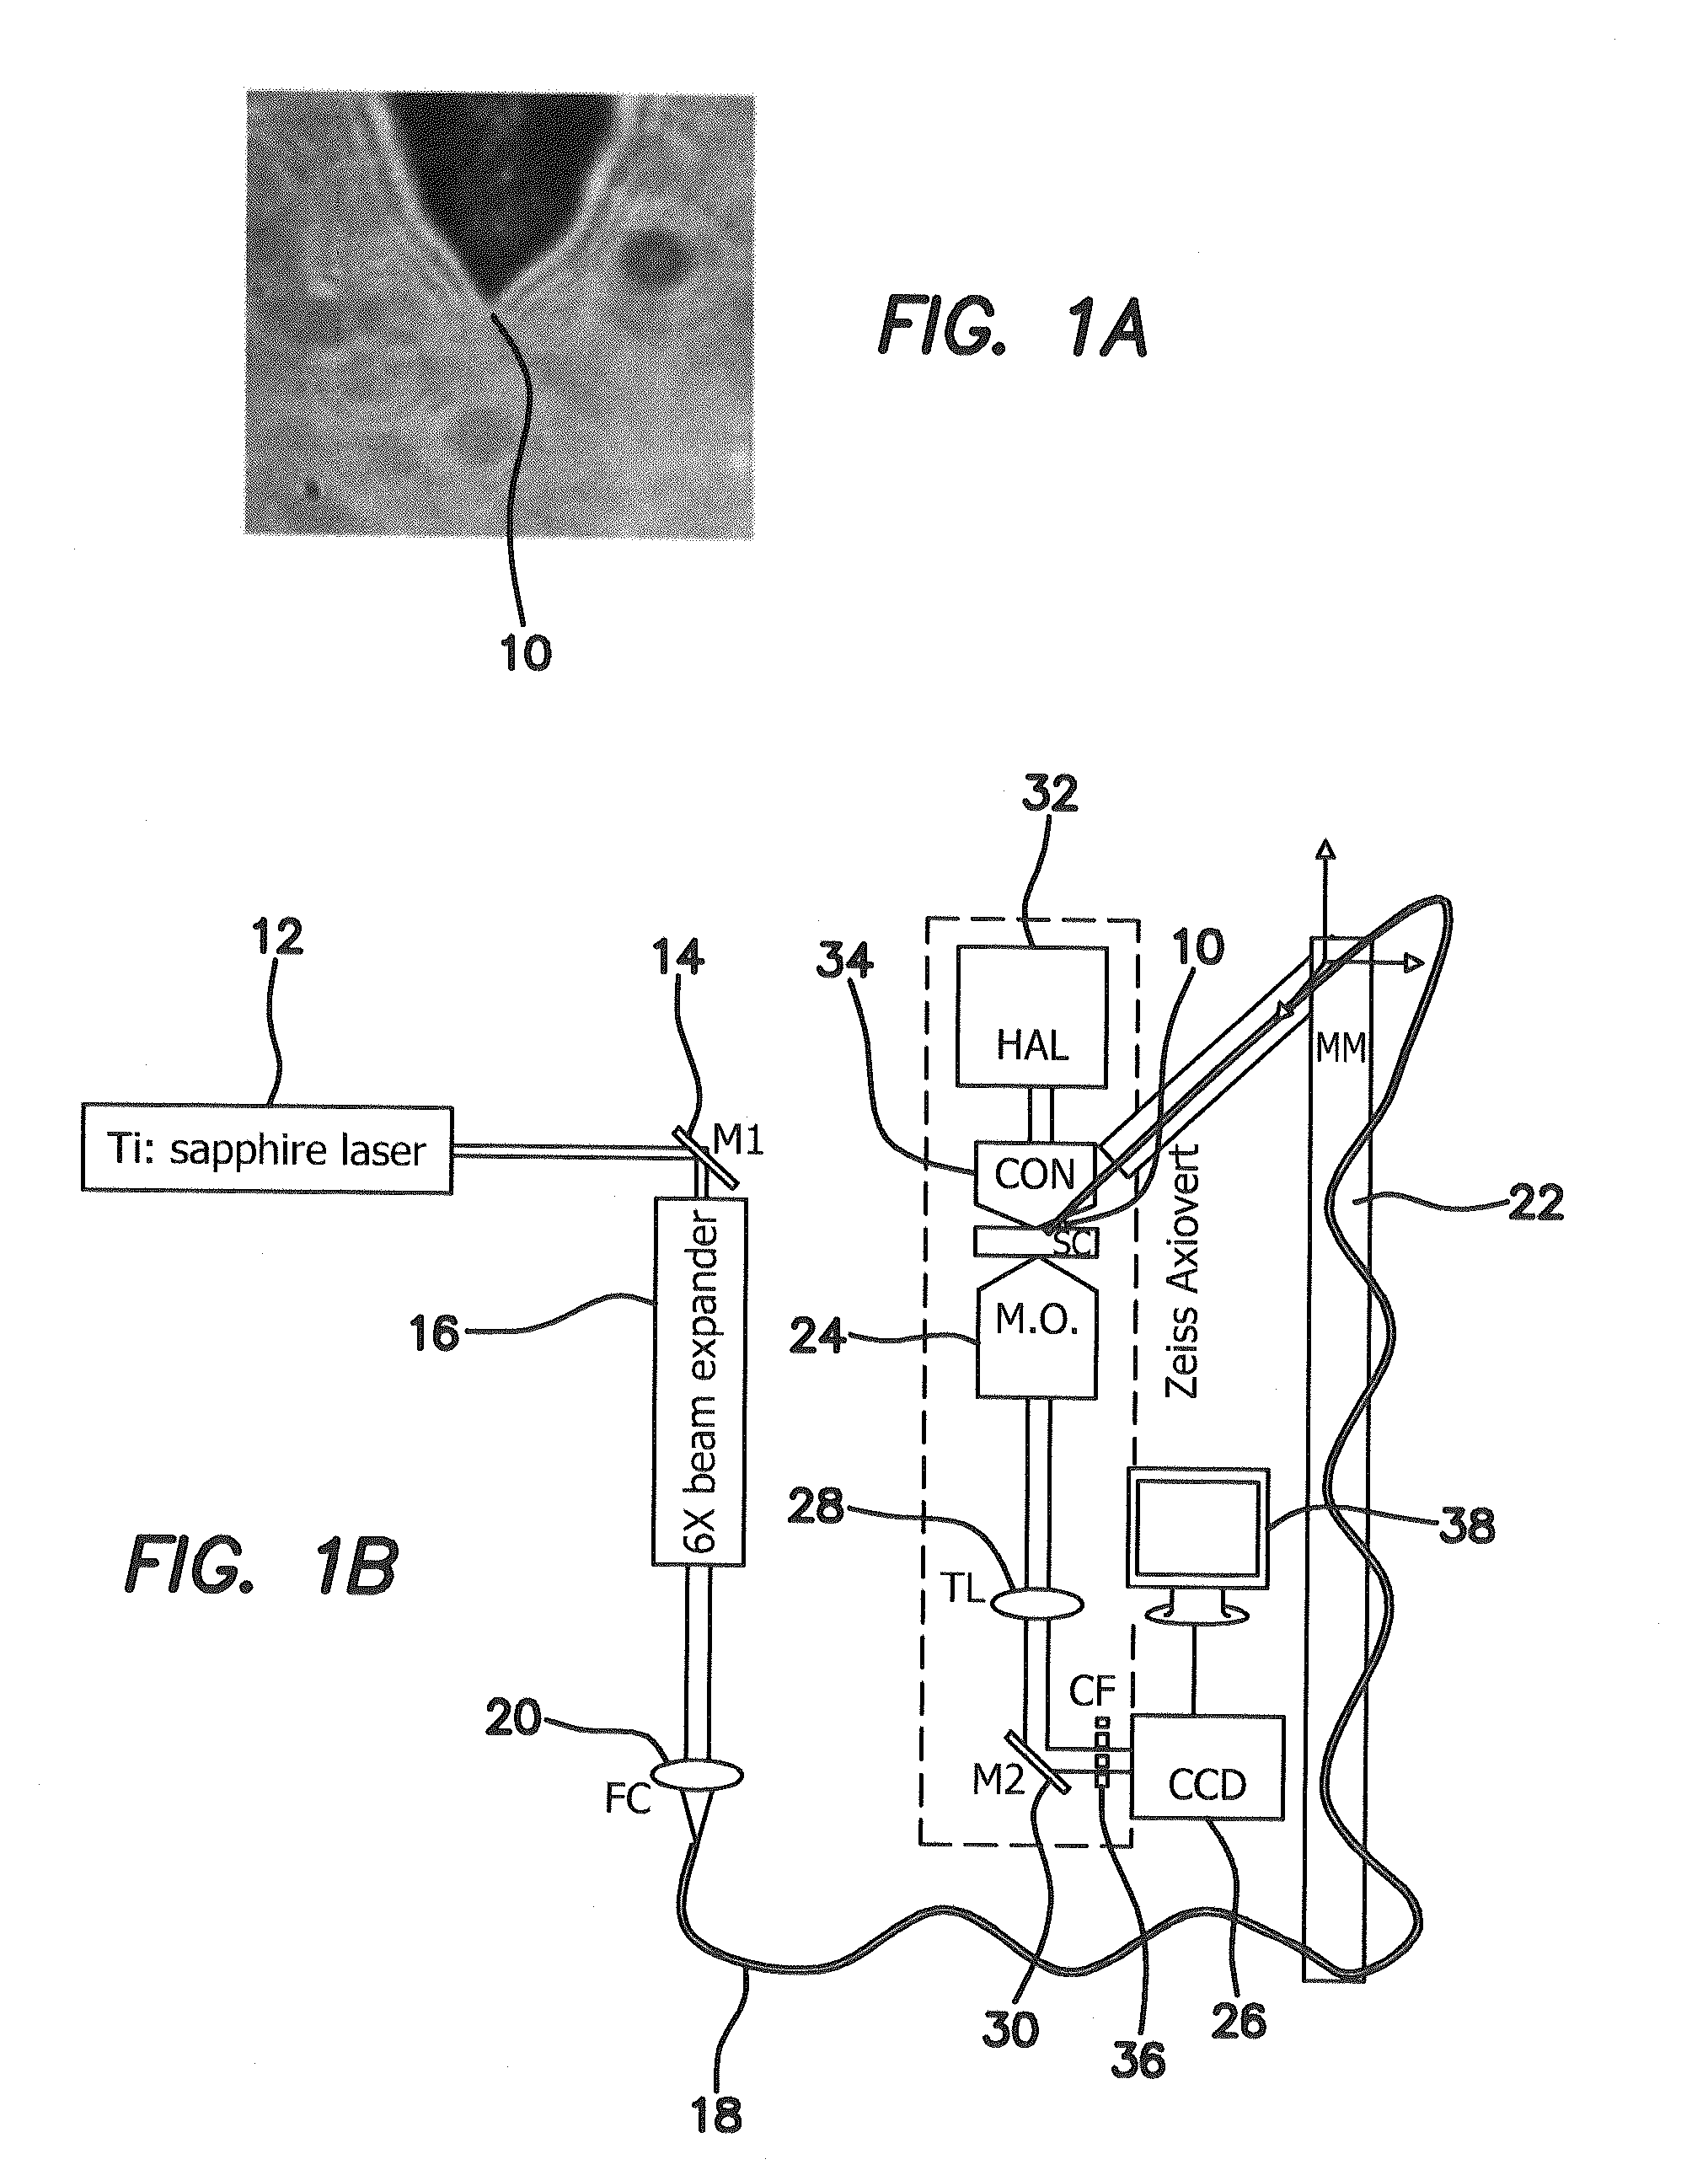 Apparatus and method for micromanipulation of microscale objects using laser light delivered through a single optical fiber and axicon lens